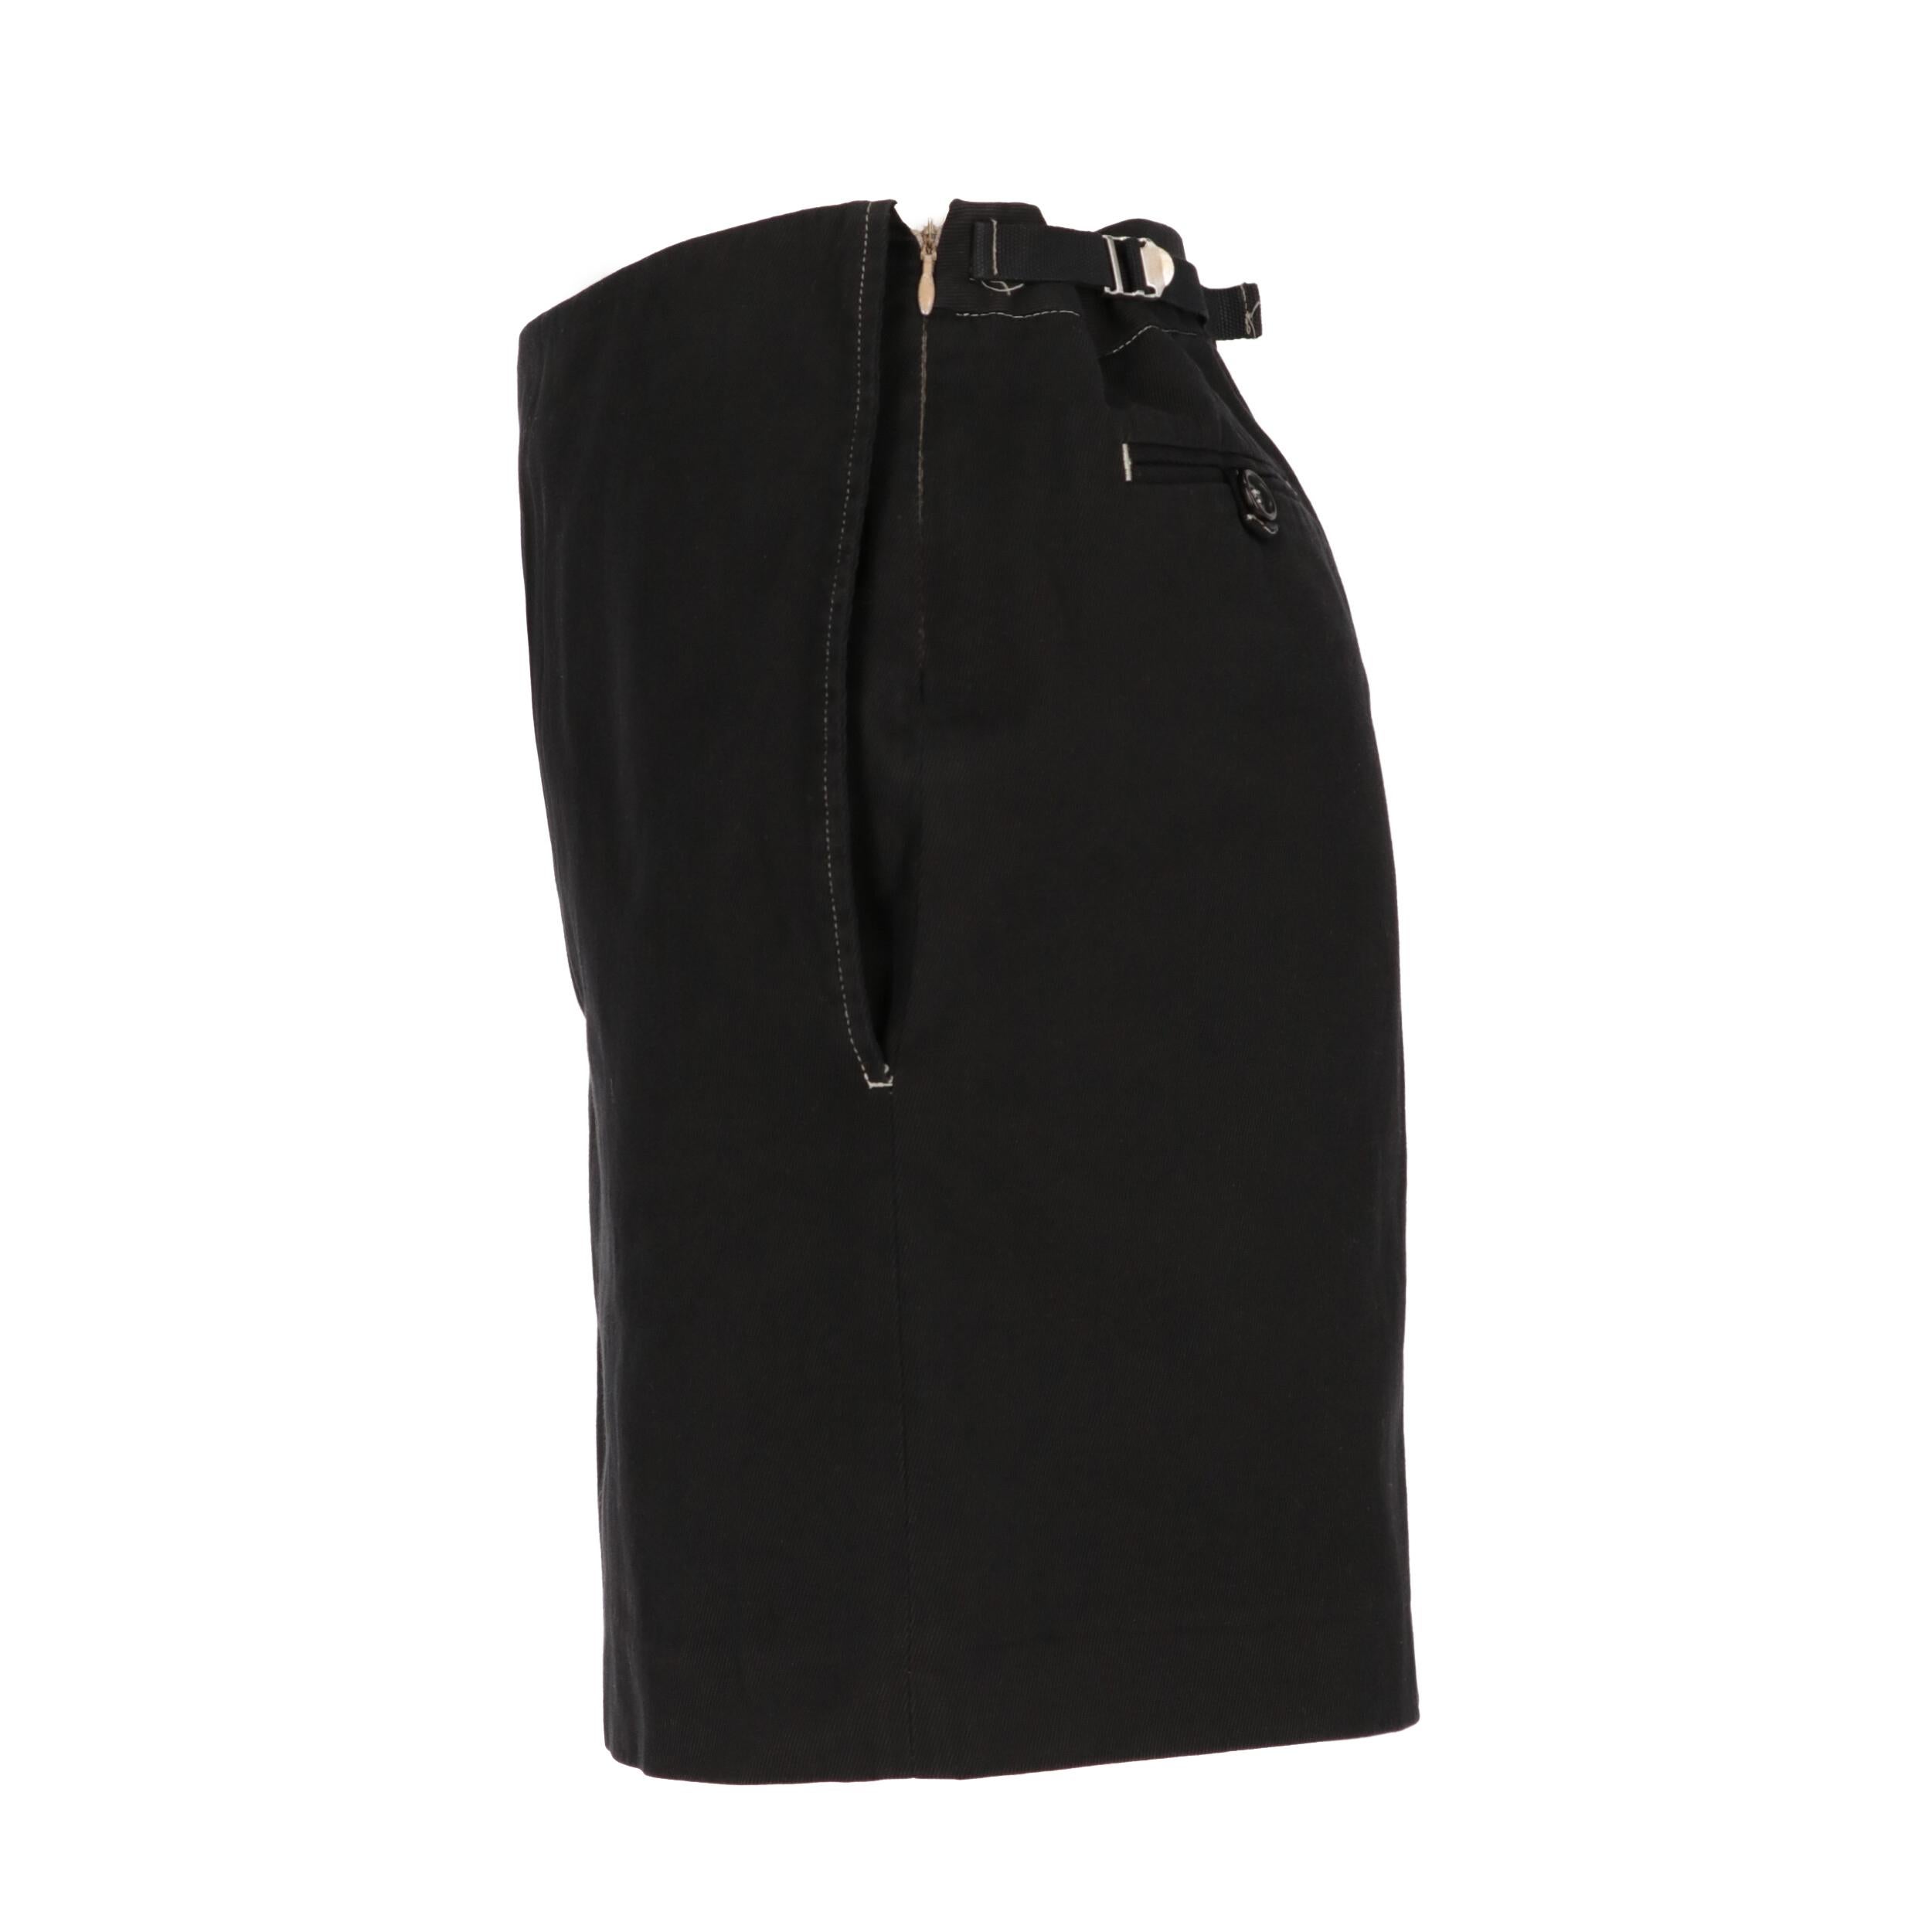 Helmut Lang black cotton mini-skirt, with two side welt pockets and zip fastening. Two back straps and two buttoned welt pockets.

Years: 2000s
Made in Italy
Size: 40 IT

Flat measurements
Height: 41 cm
Waist: 38 cm